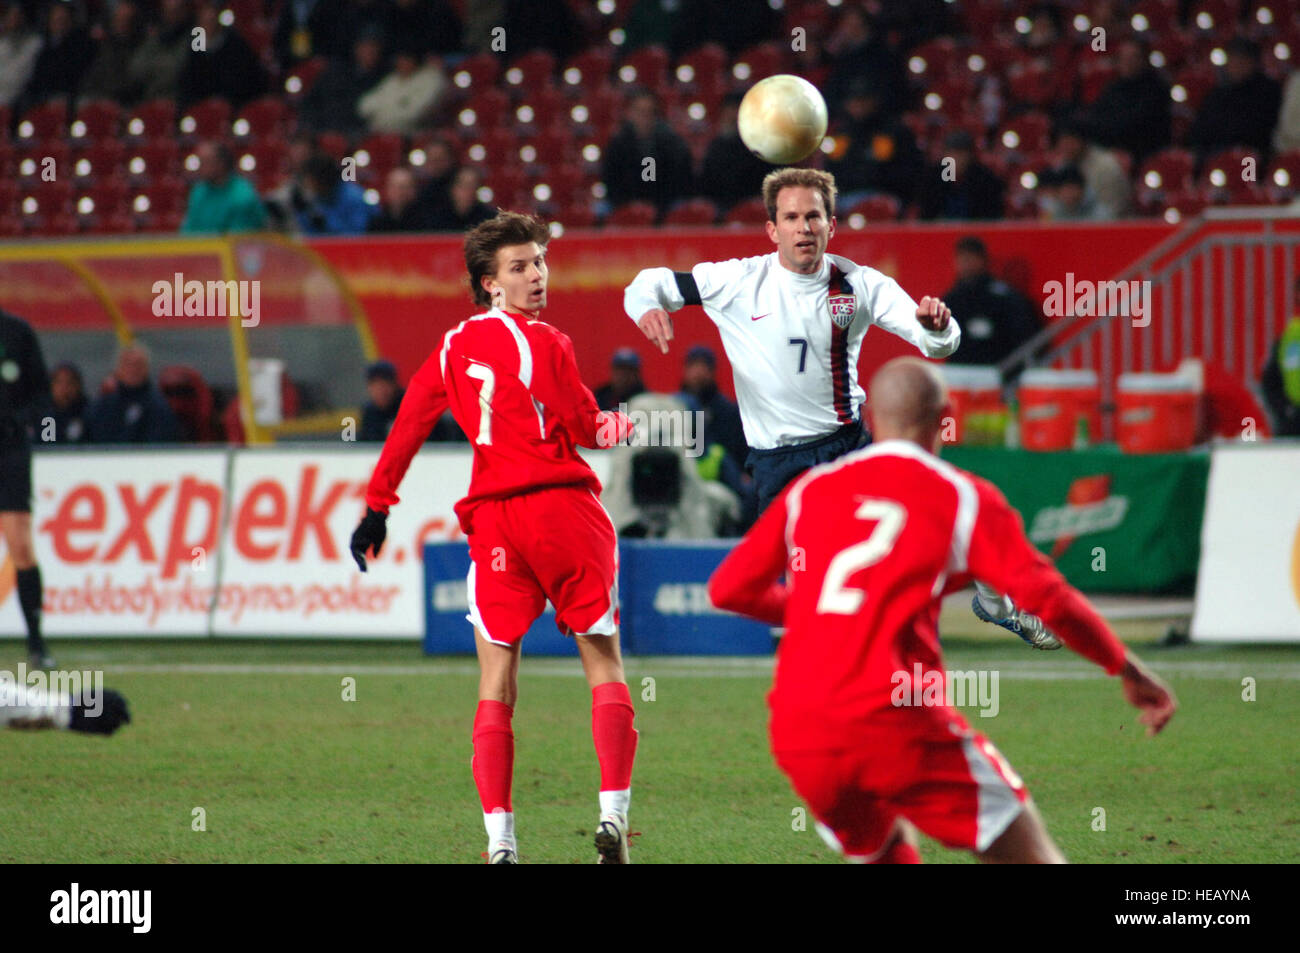 American soccer player Eddie Lewis directs the ball forward with a 'header' during the U.S. Men's National Soccer Team 1-0 victory over Poland, Wednesday, March 1, 2006, in Kaiserslautern, Germany.  More than 13,000 soccer fans attended the exhibition match at Fritz-Walter-Stadium. Master Sgt. John E. Lasky) Stock Photo